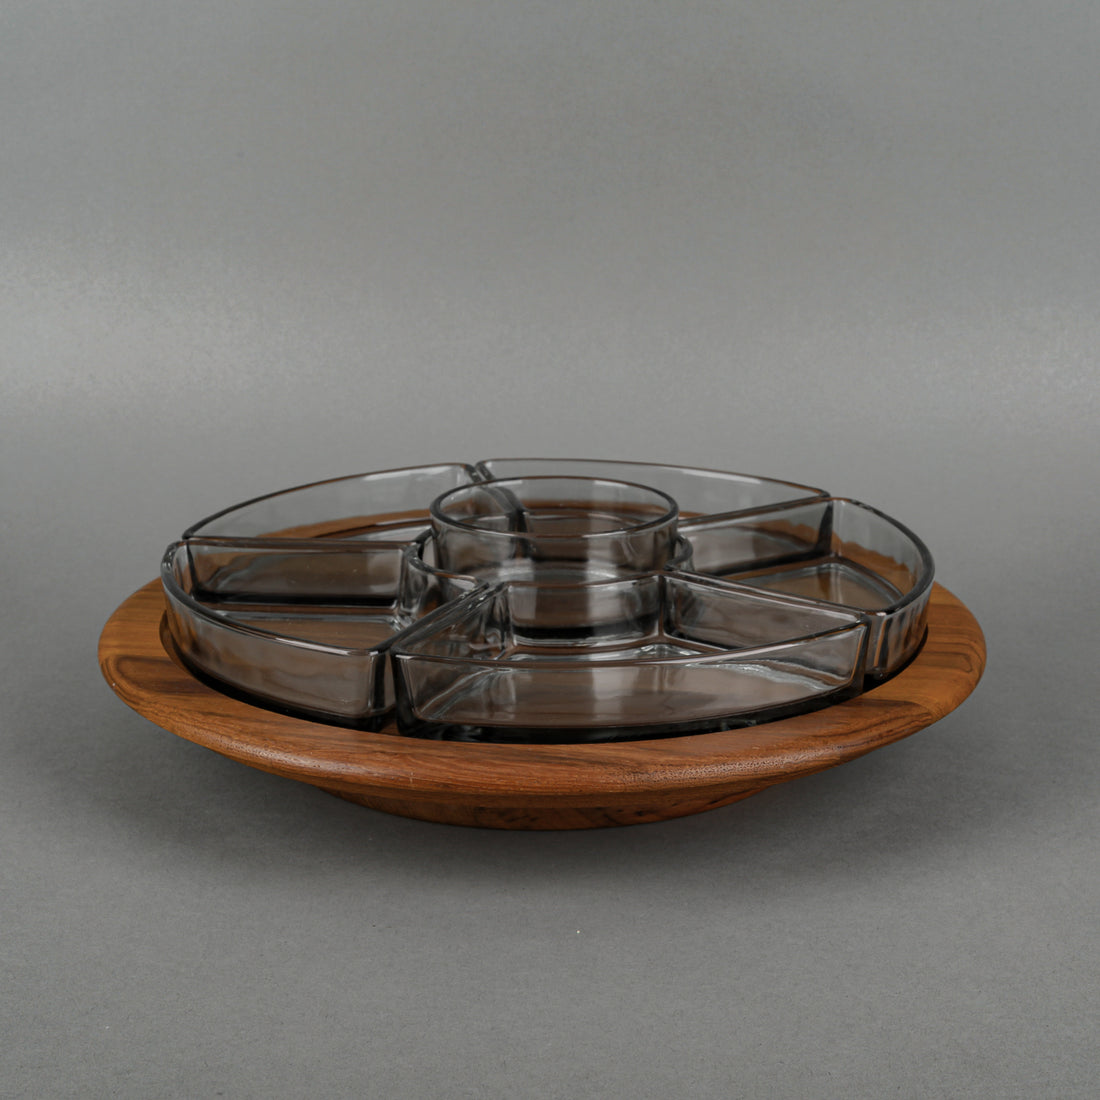 DIGSMED DENMARK Teak Lazy Susan with Glass Inserts